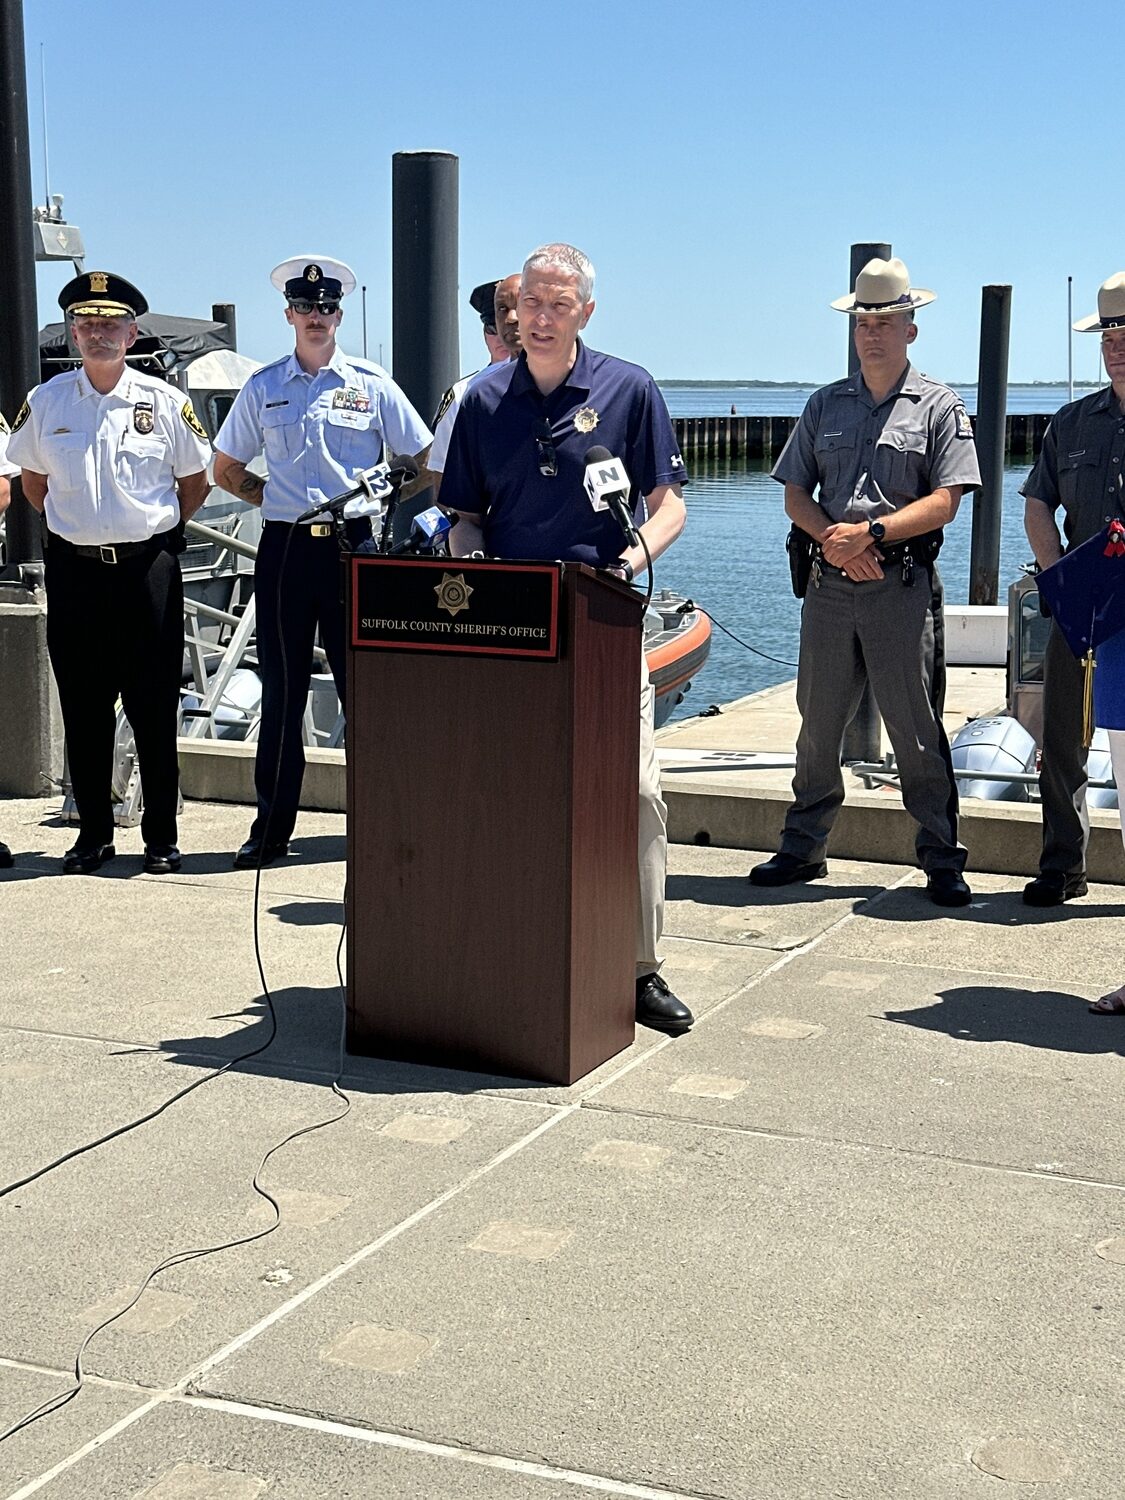 Chief Assistant District Attorney Allen Bode speaks at the U.S. Coast Guard Station Shinnecock on Tuesday. DAN STARK